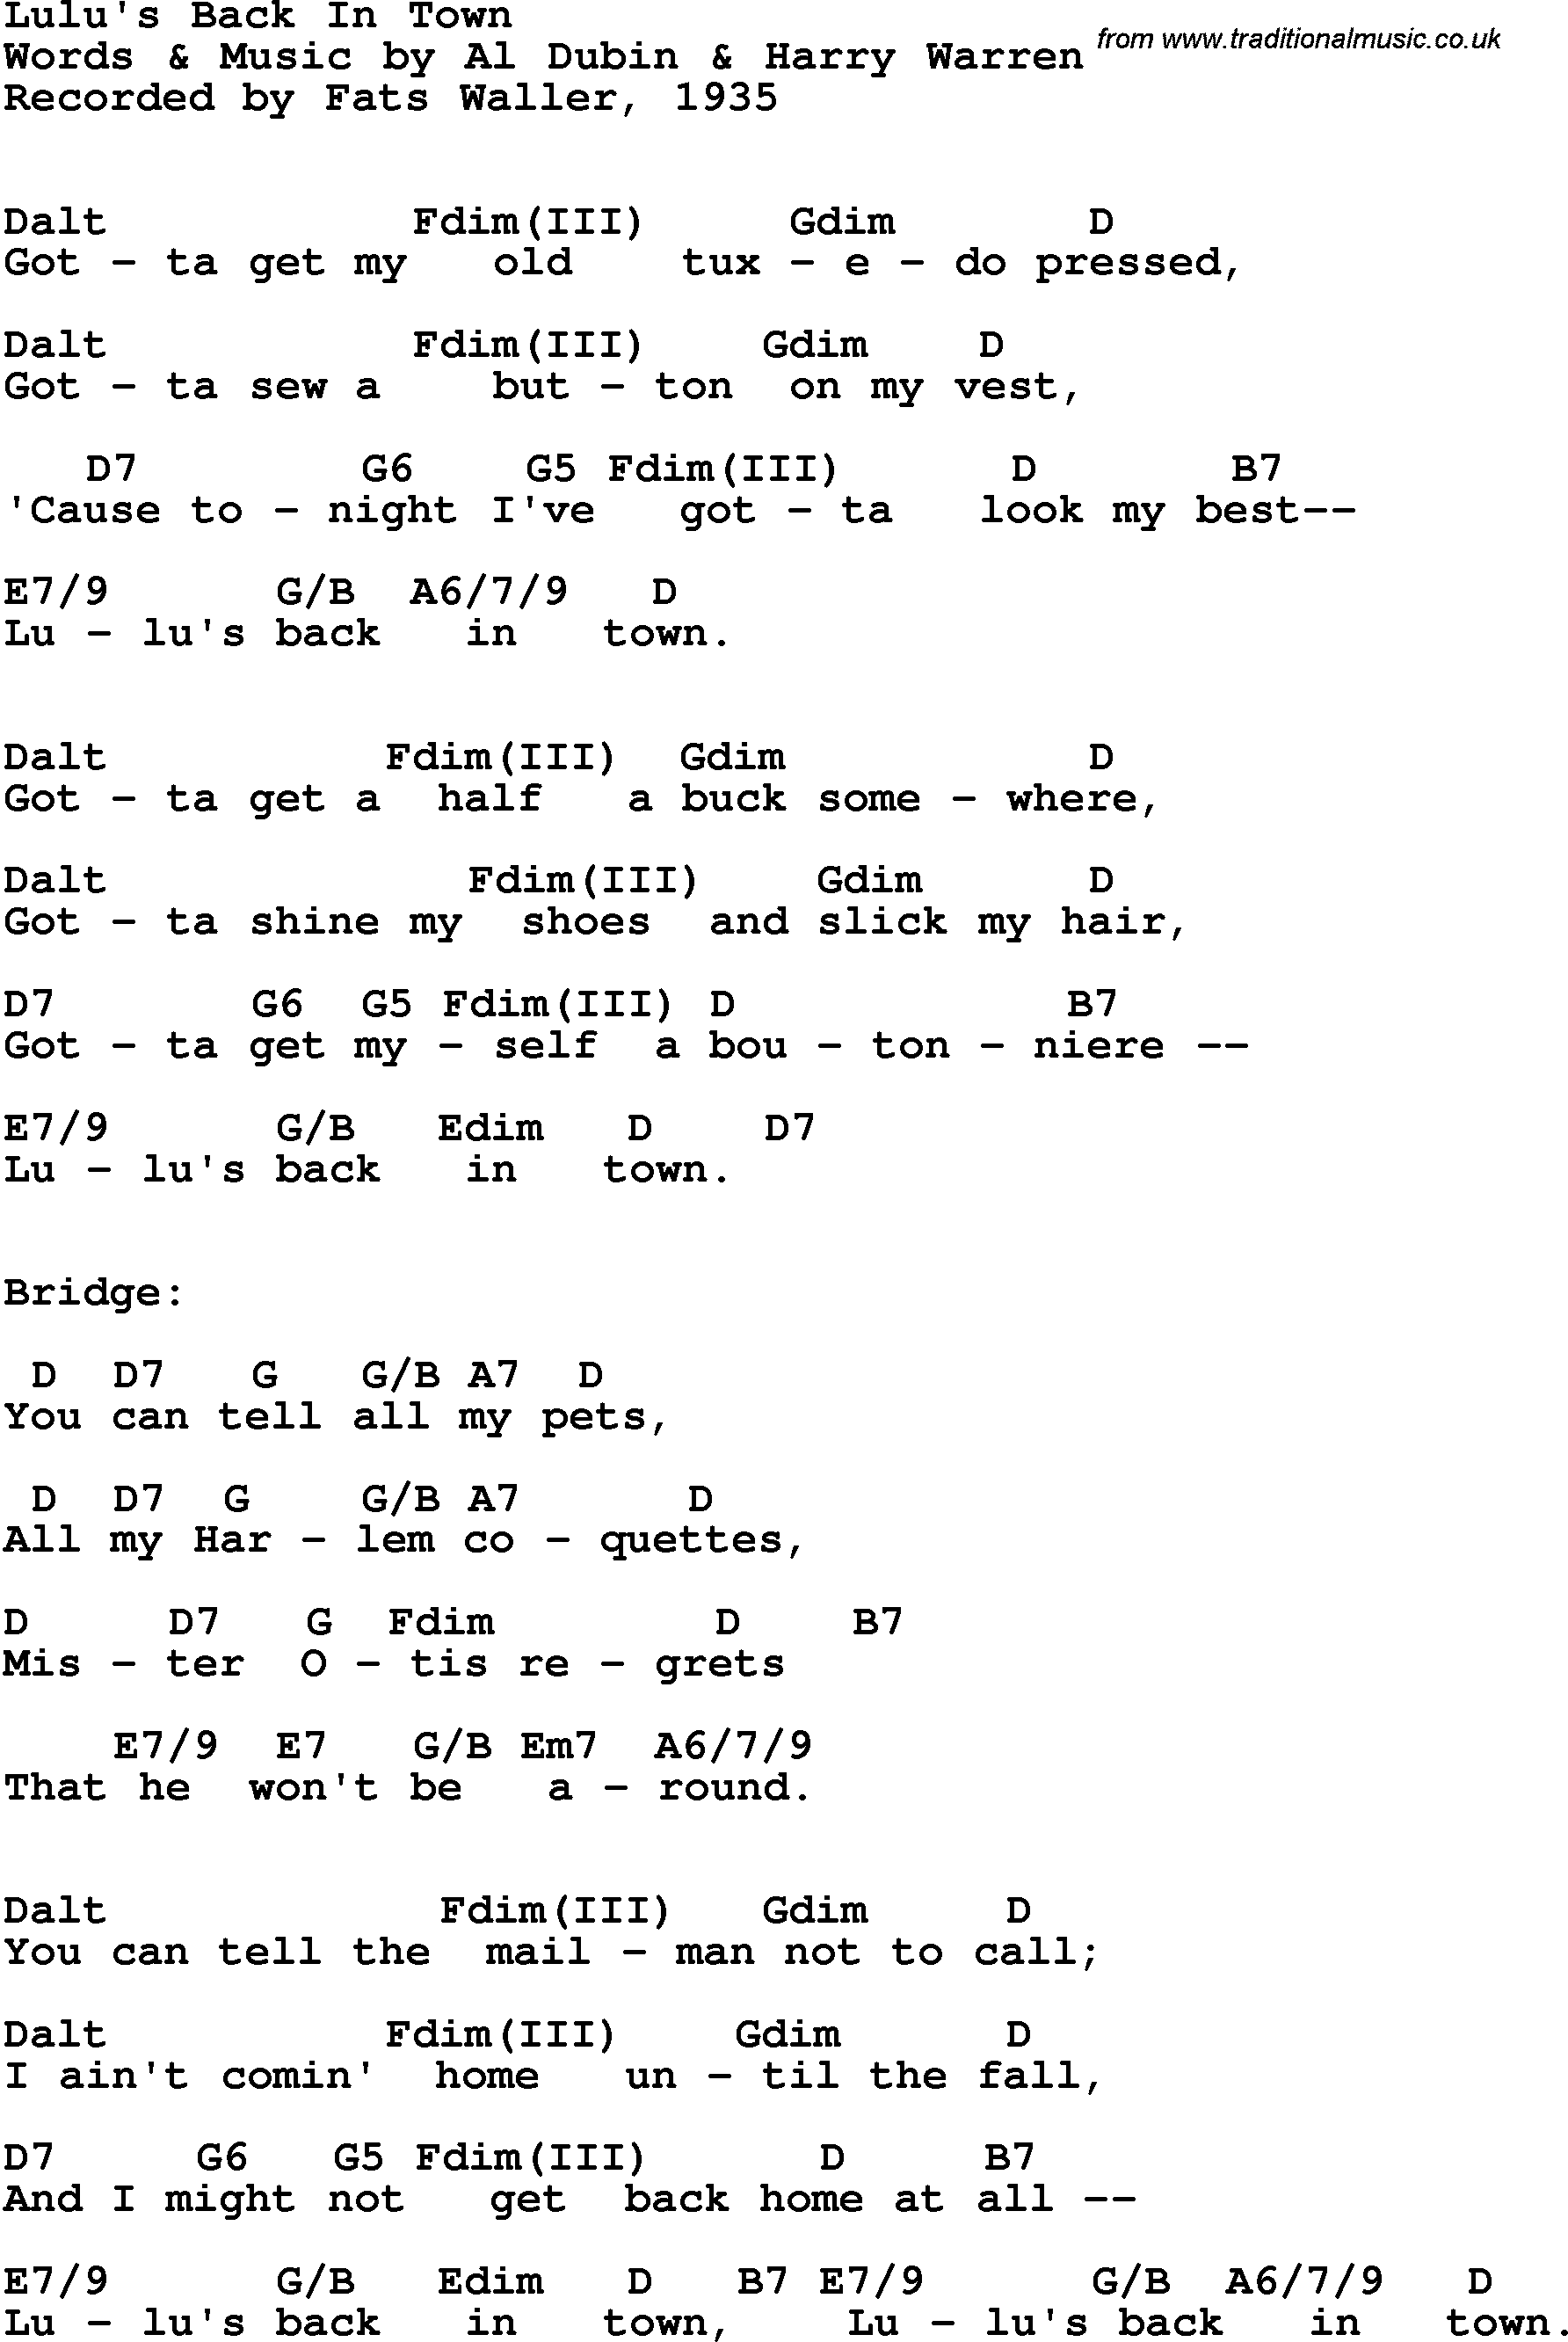 Song Lyrics with guitar chords for Lulu's Back In Town - Fats Waller, 1935